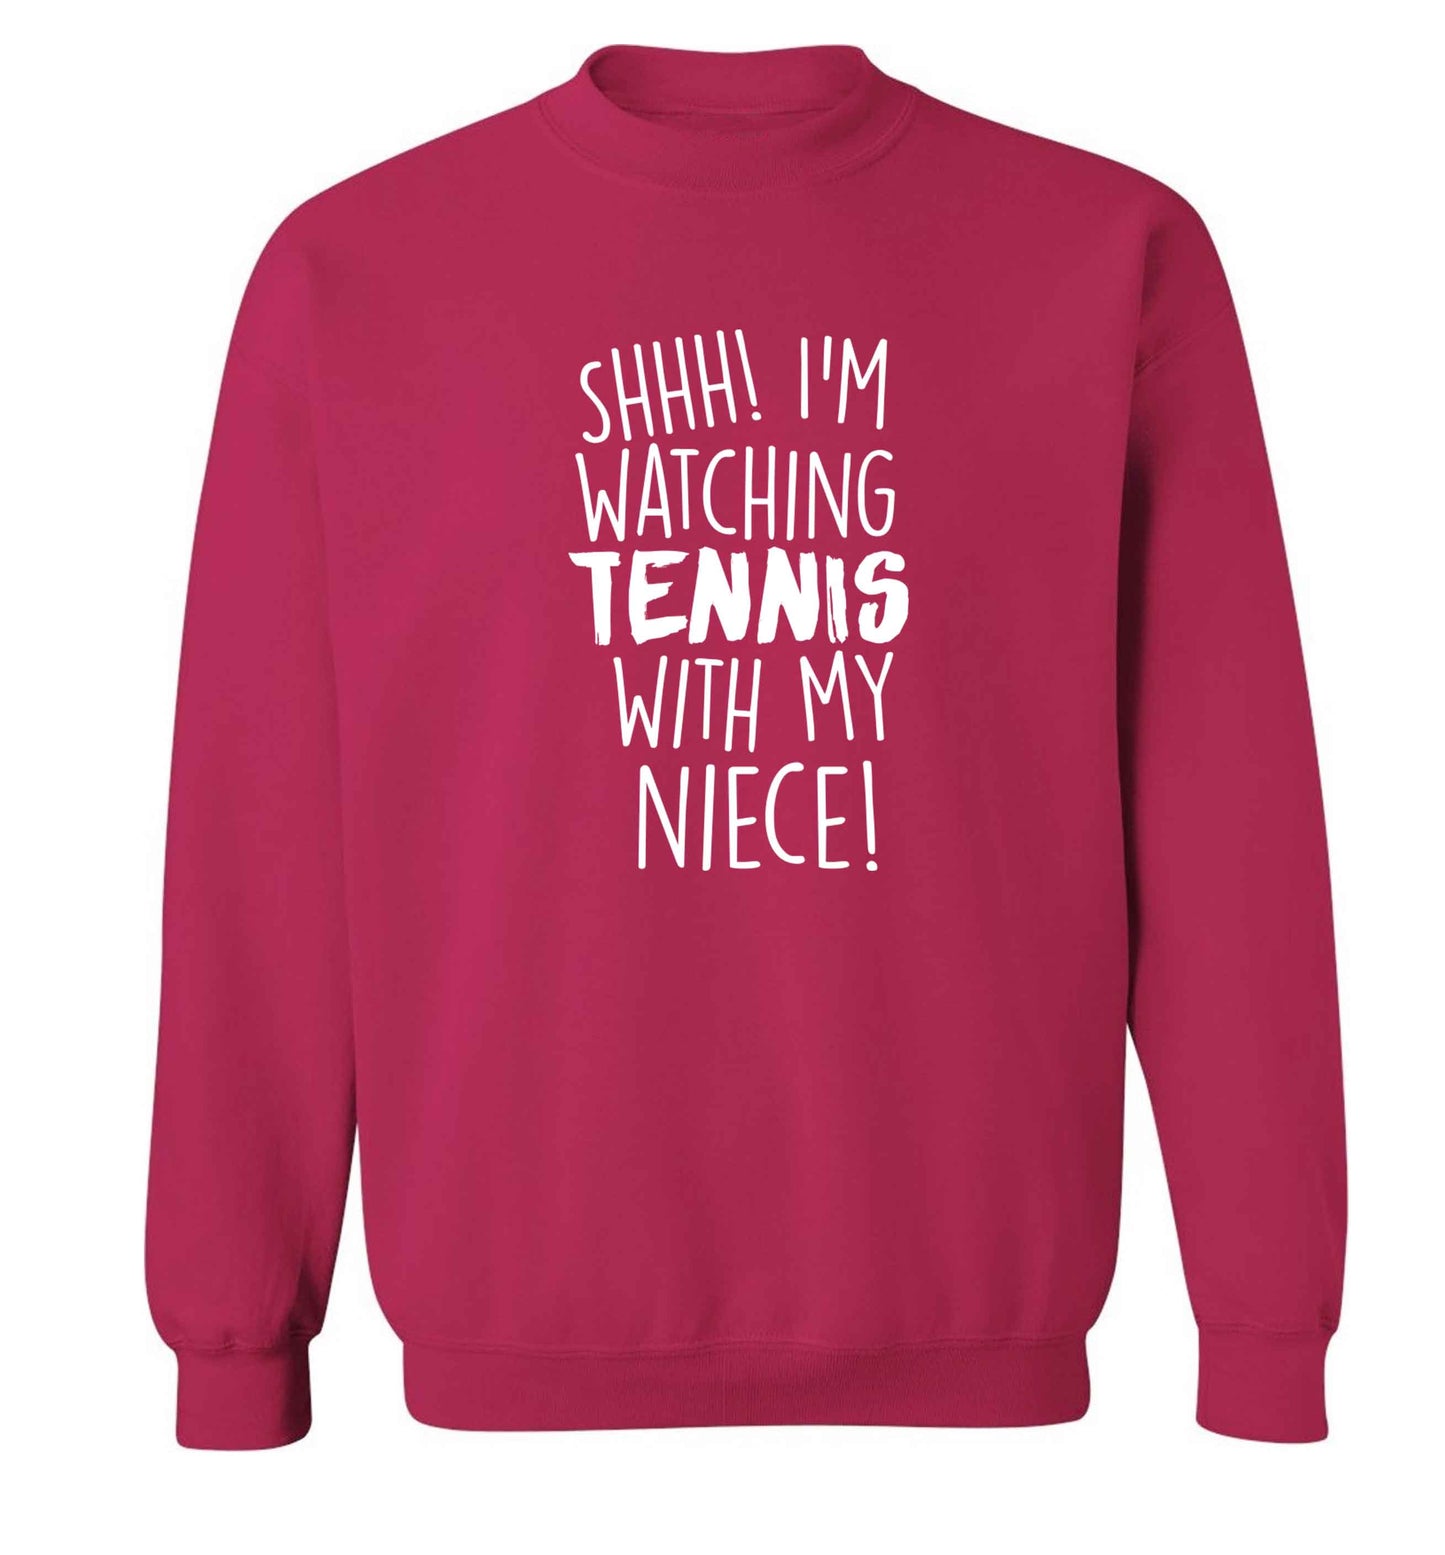 Shh! I'm watching tennis with my niece! Adult's unisex pink Sweater 2XL